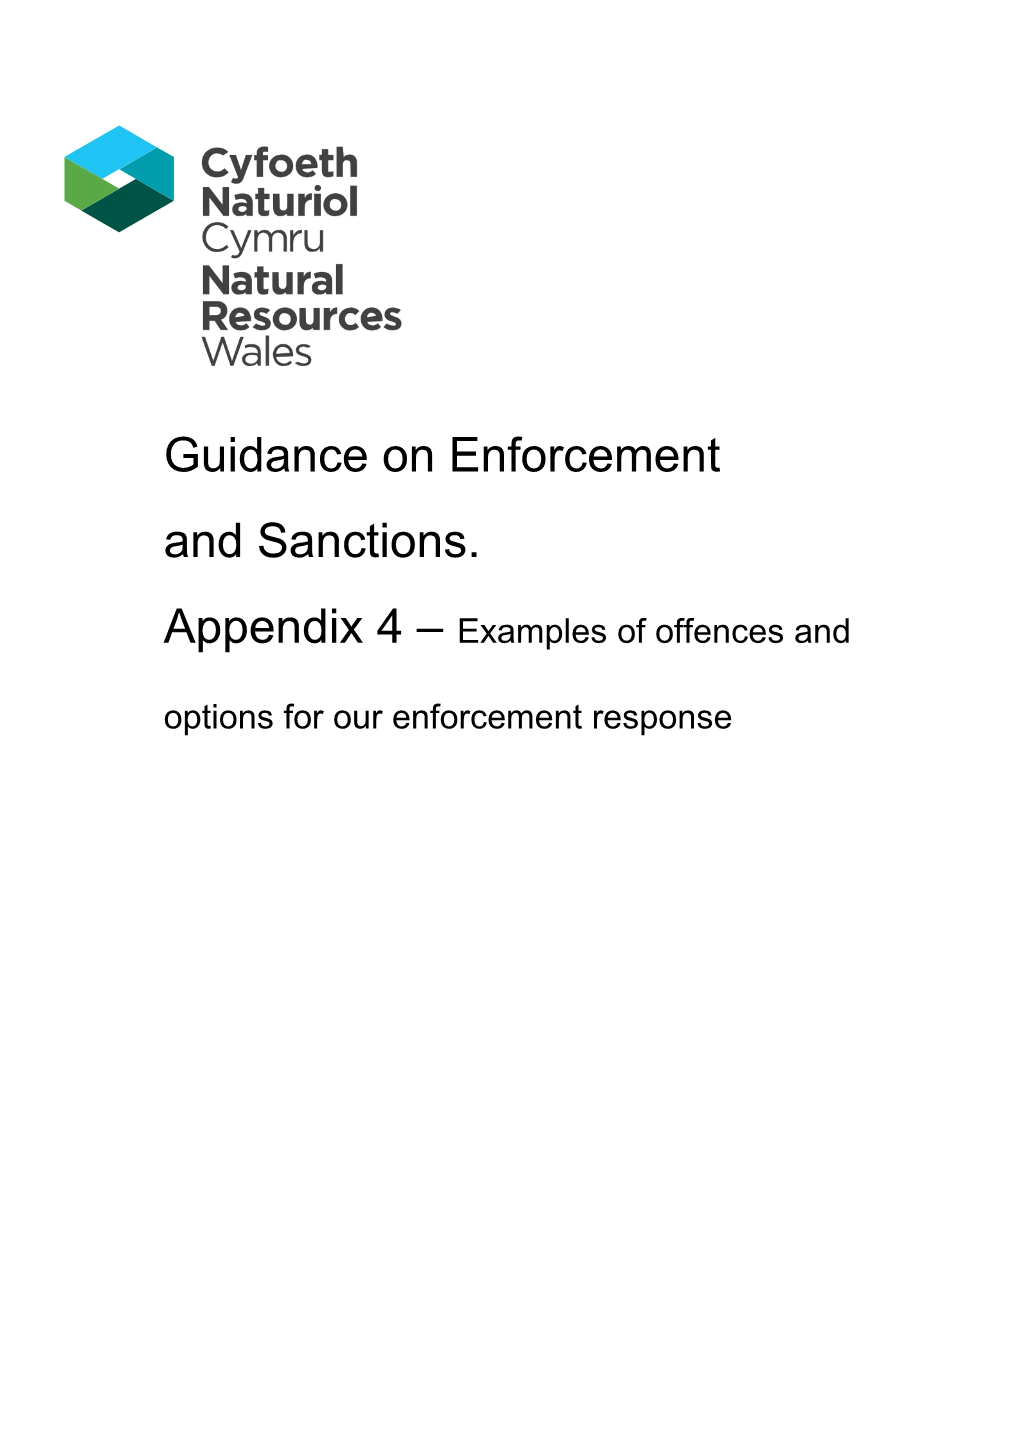 Appendix 4 Examples of Offences and Options for Our Enforcement Response